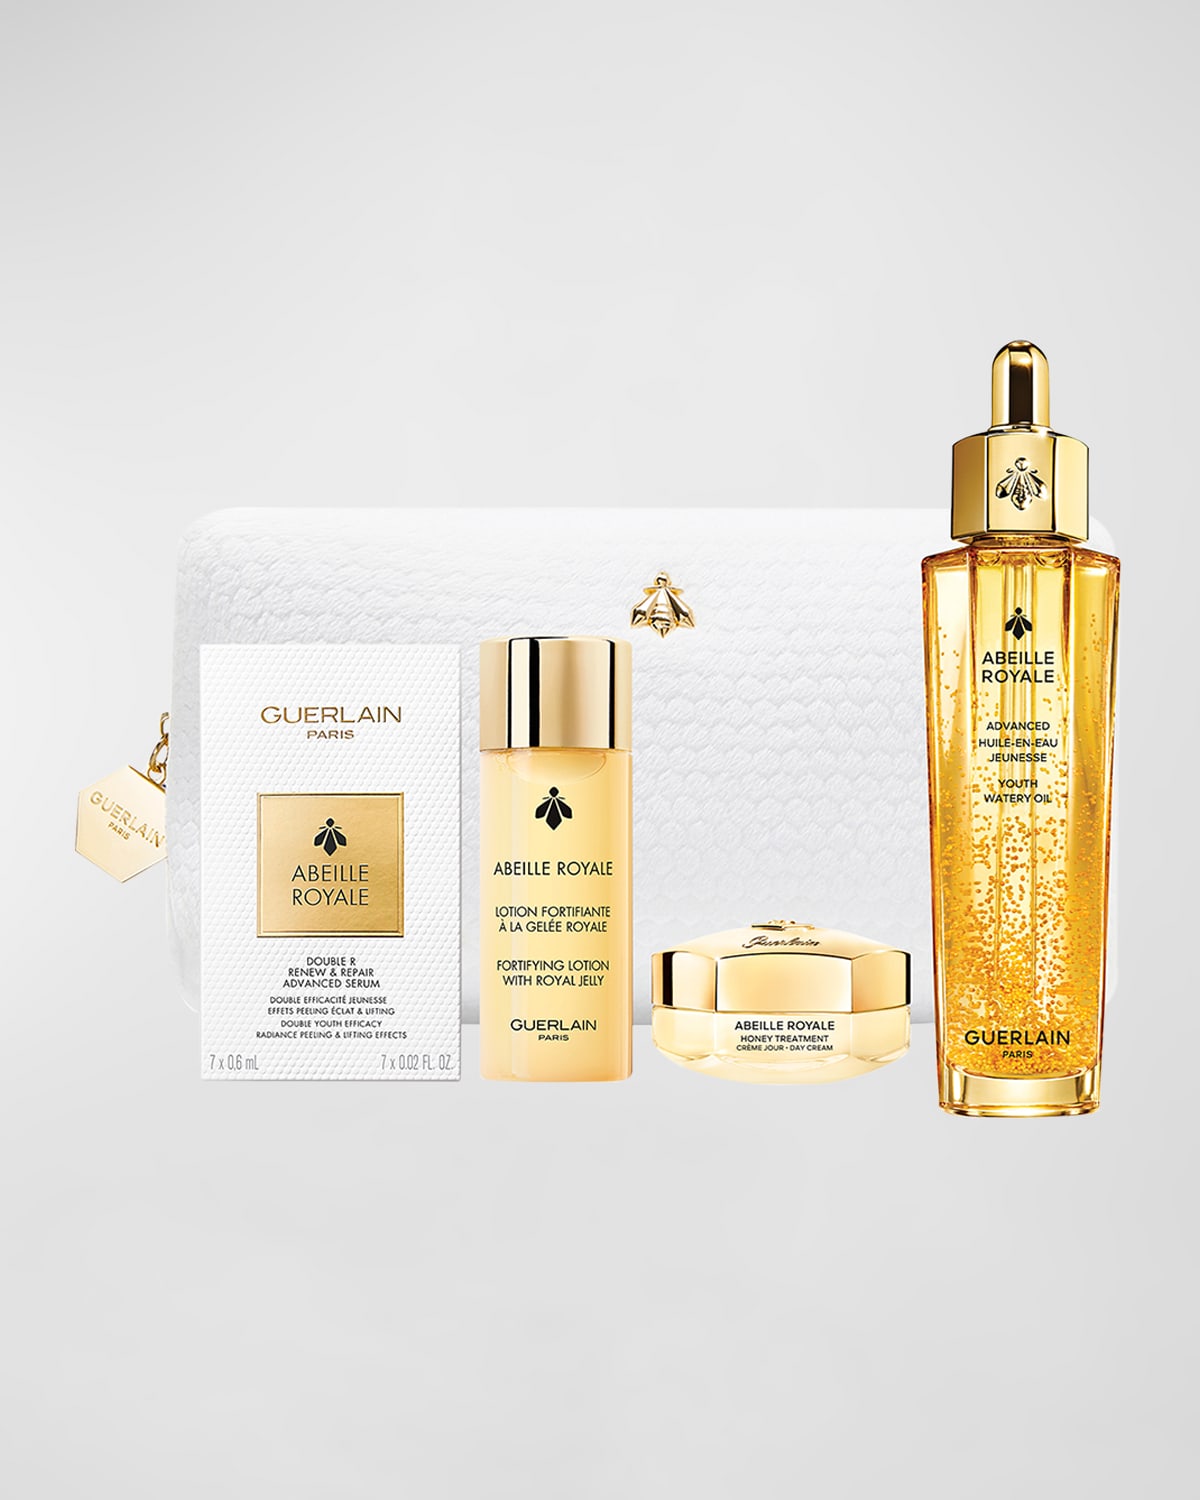 Guerlain Limited Edition Abeille Royale Oil And Routine Discovery Set ($246 Value) In White